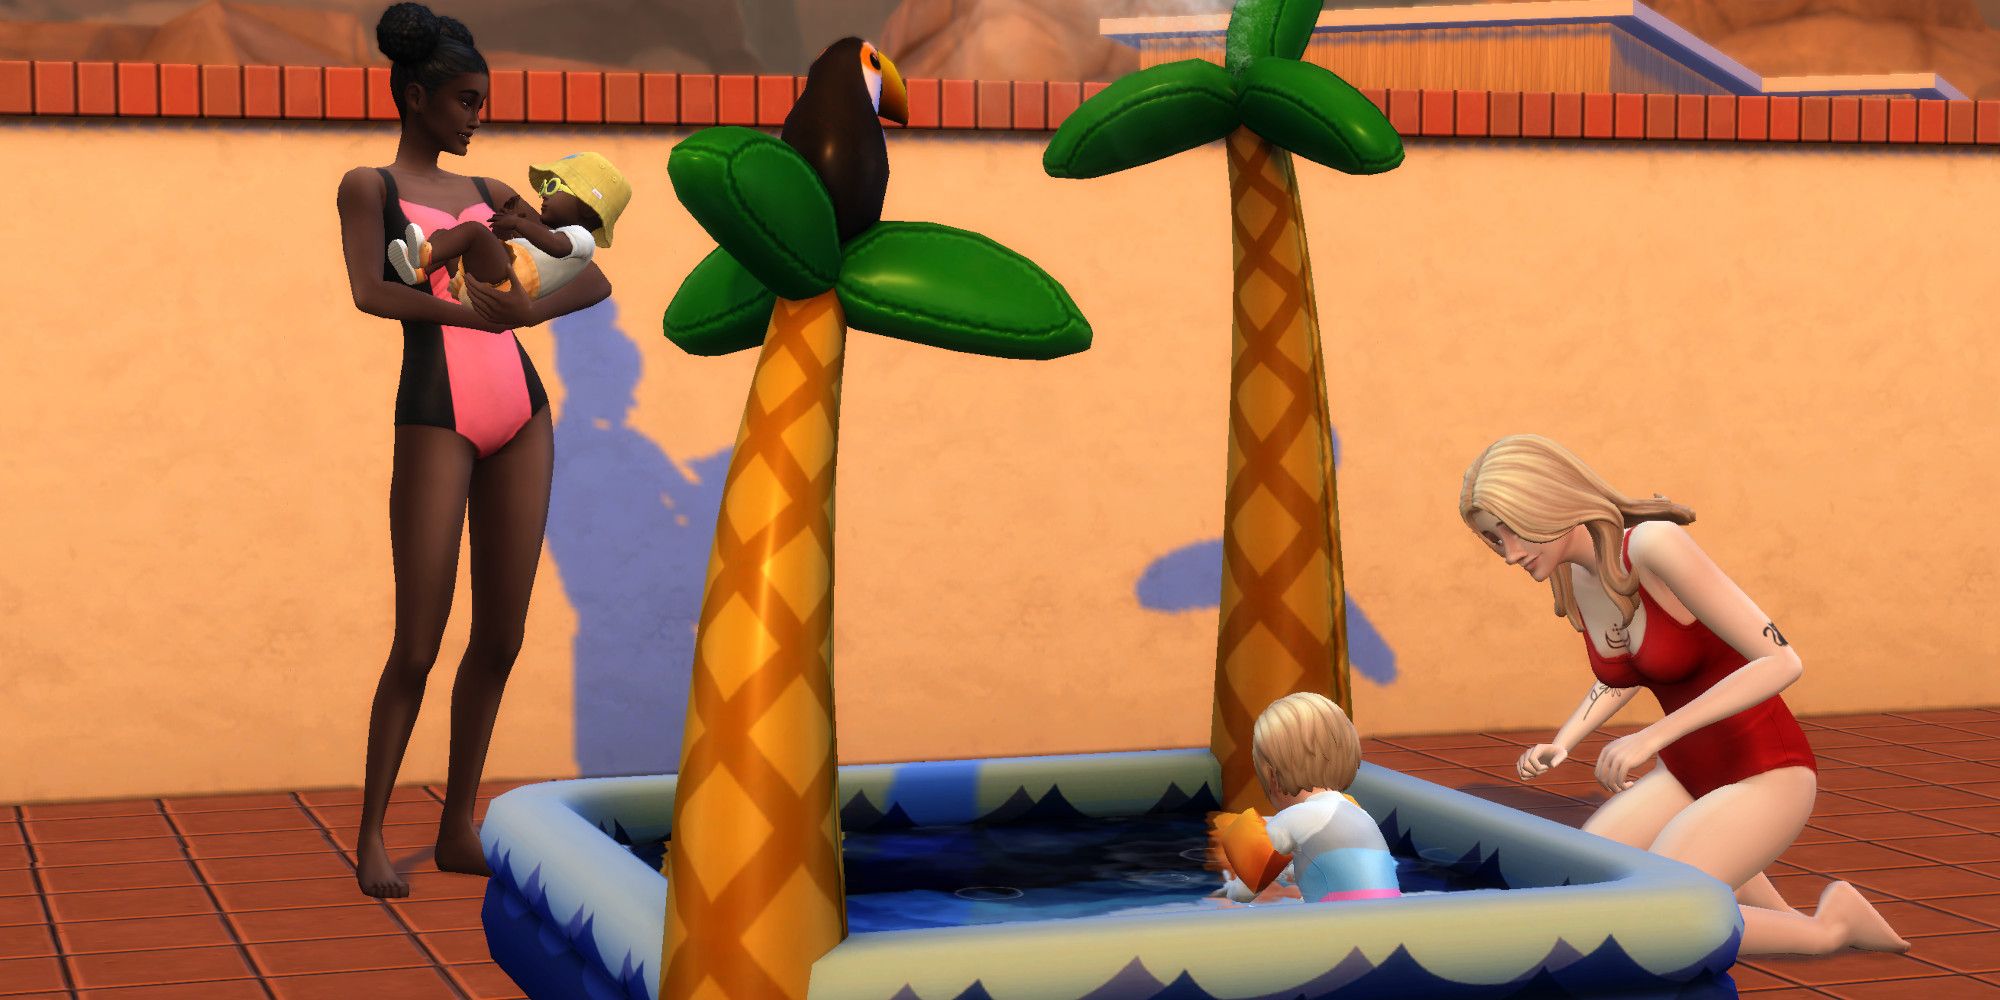 Two adult Sims from The Sims 4: one holding a baby Sim and the other playing with a toddler in the kiddie pool